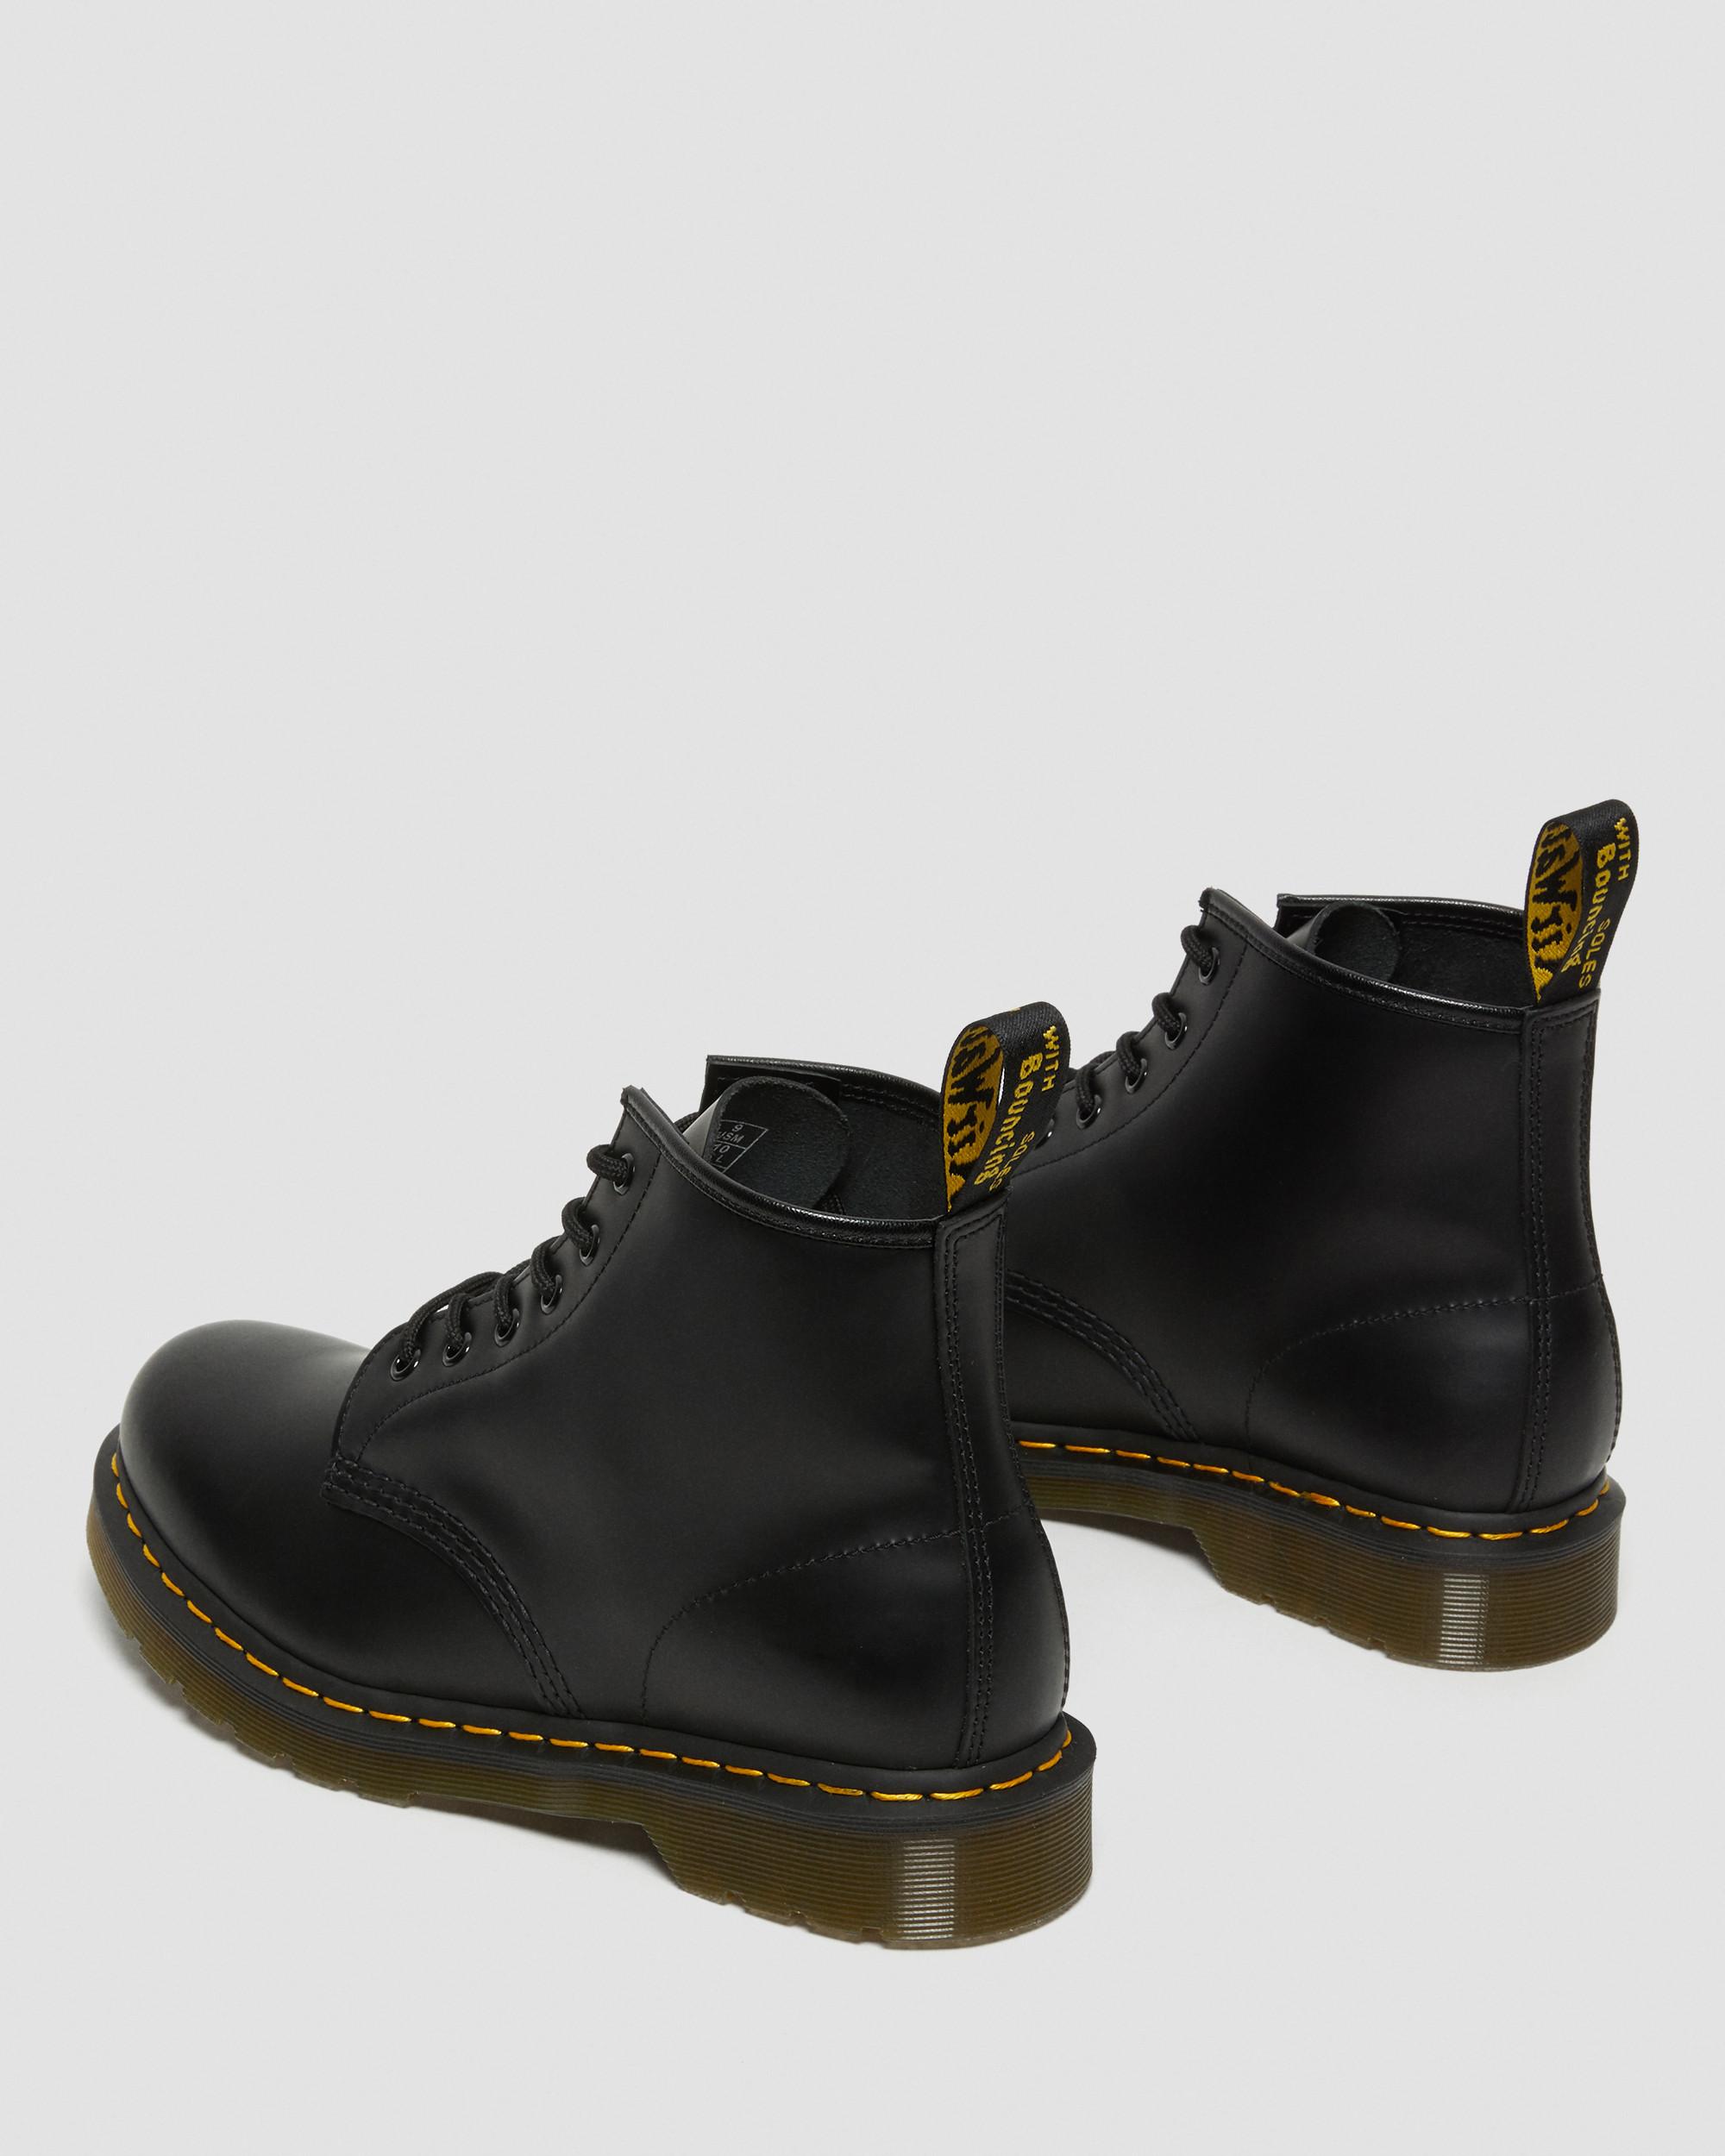 Boots basses 101 Stitch en cuir SmoothBoots basses 101 Yellow Stitch en cuir Smooth Dr. Martens